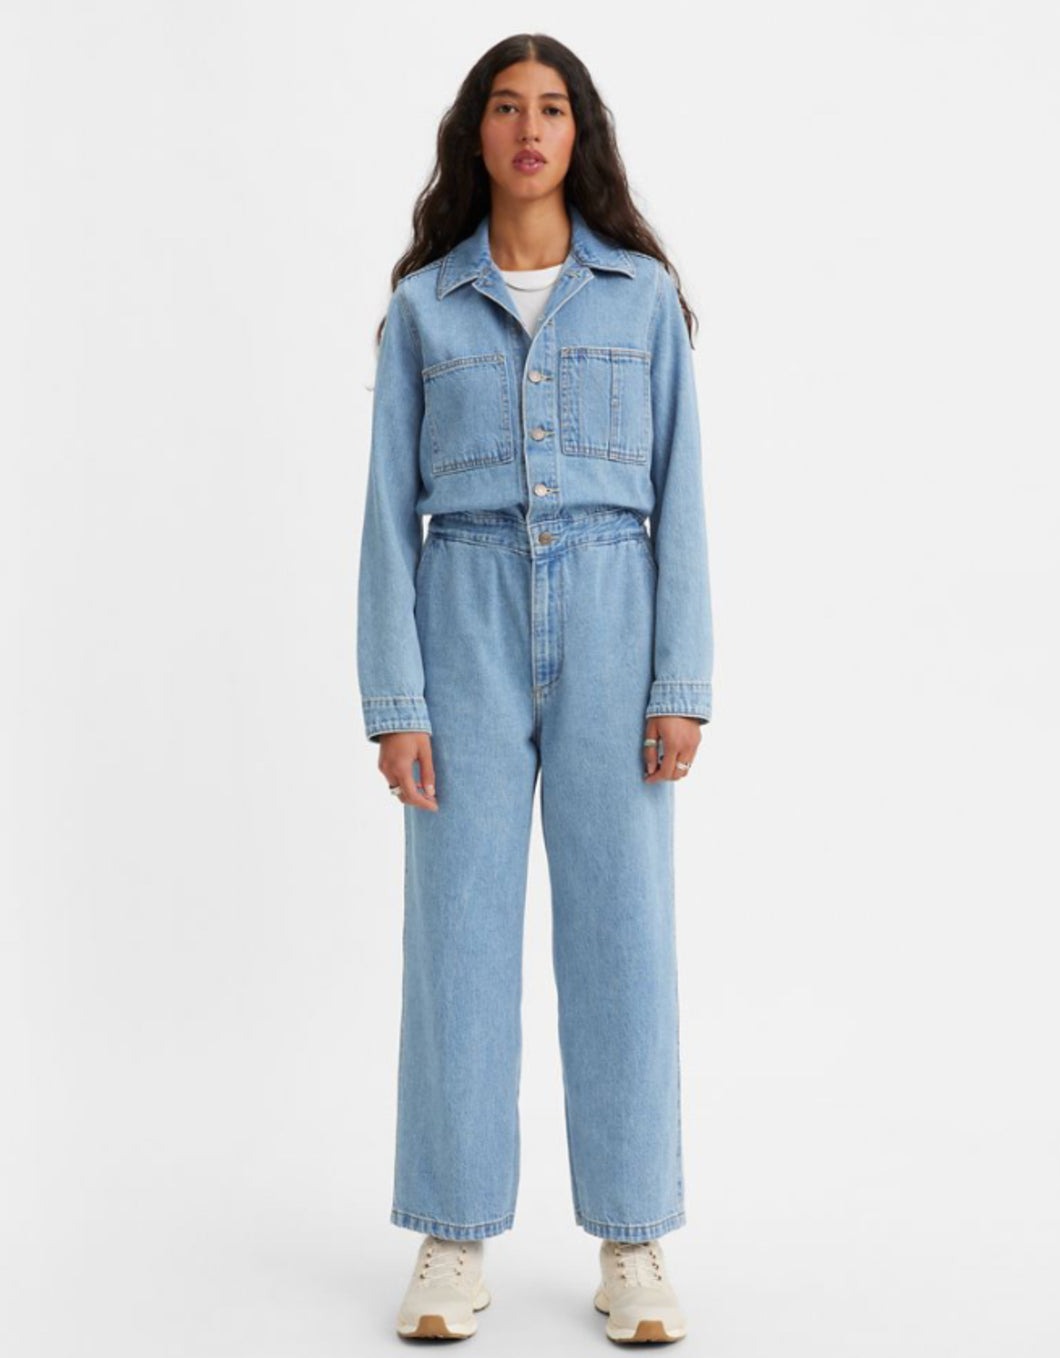 Levi's Iconic Coverall Jumpsuit